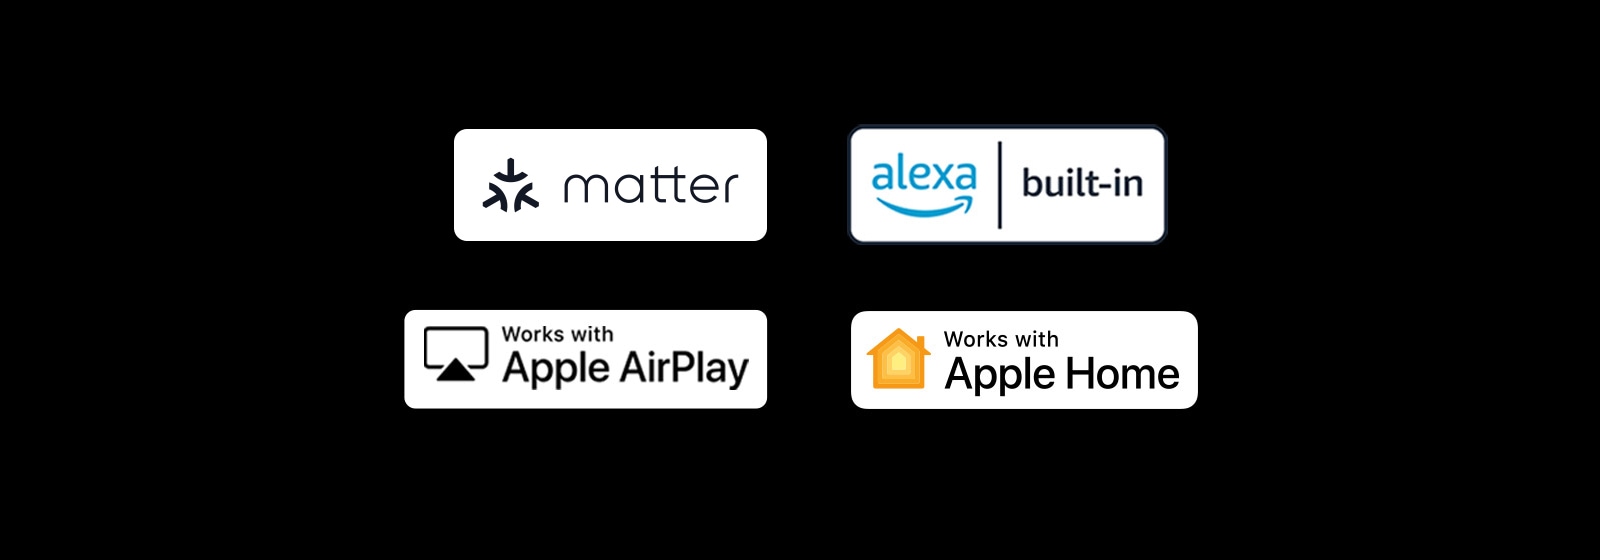 The logo of alexa built-in<br>The logo of works with Apple AirPlay<br>The logo of works with Apple Home<br>The logo of works with Matter